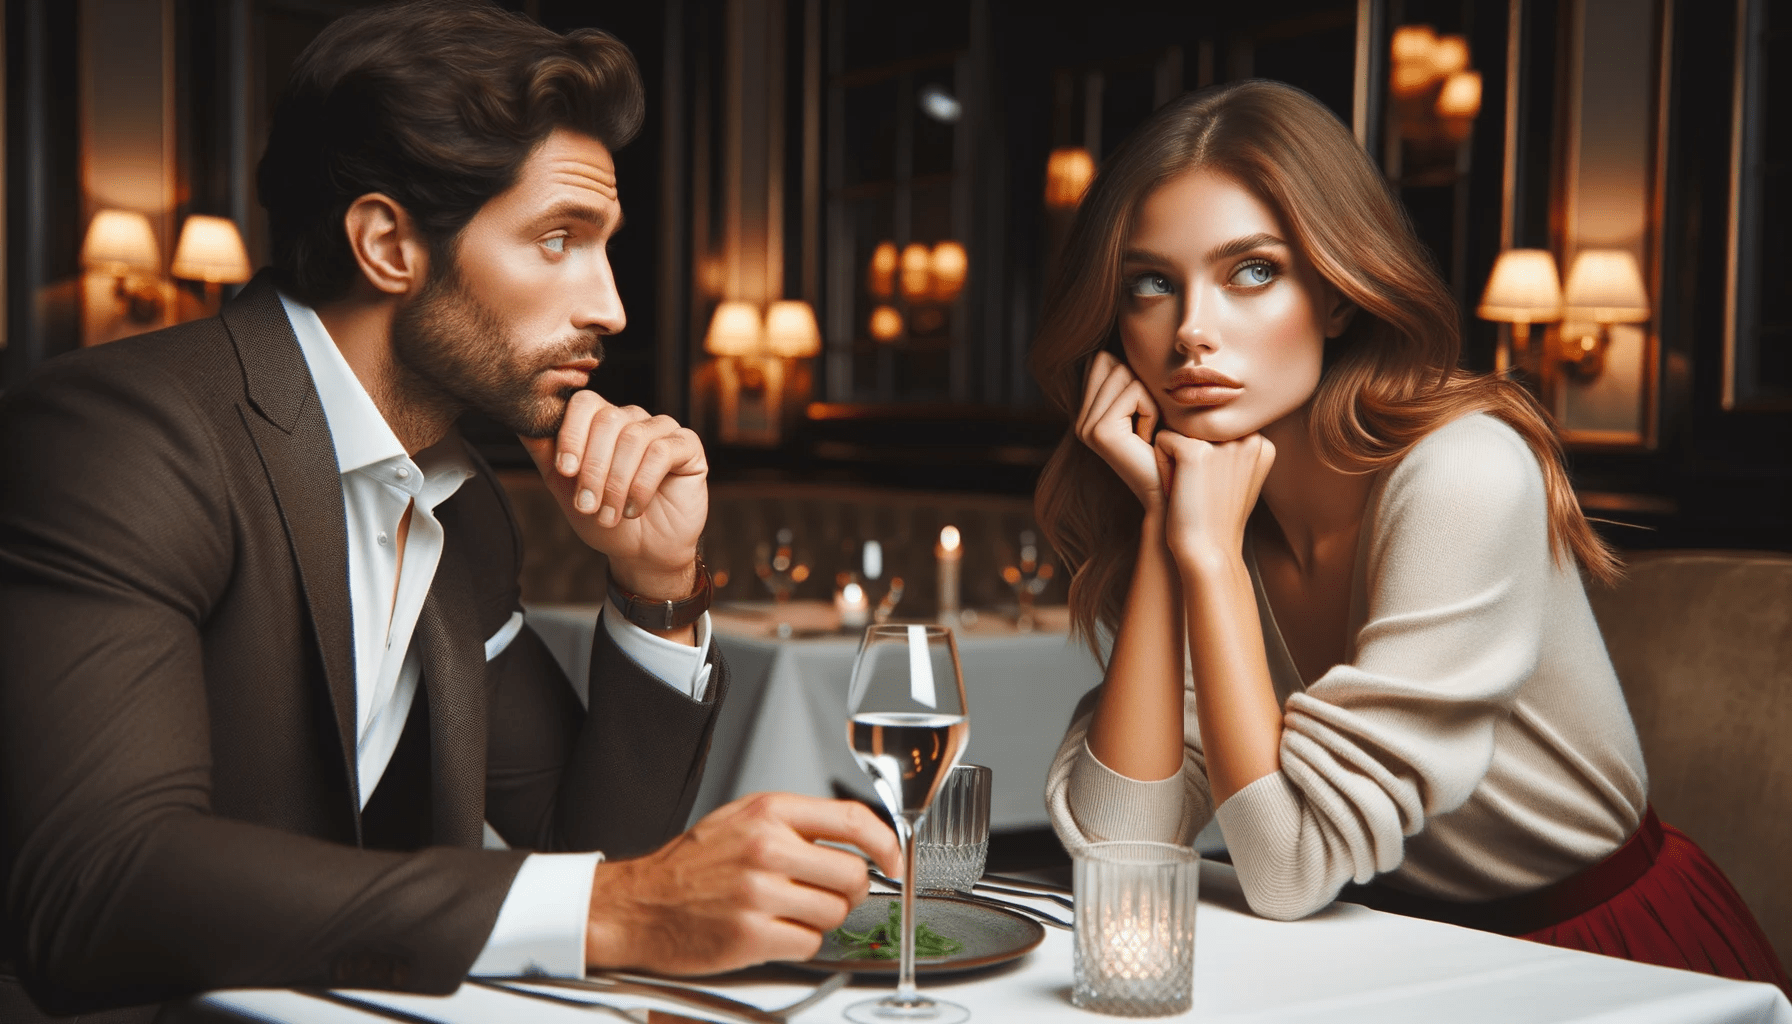 Beautiful couple at a sophisticated restaurant the man earnestly trying to engage in meaningful conversation but the womans g